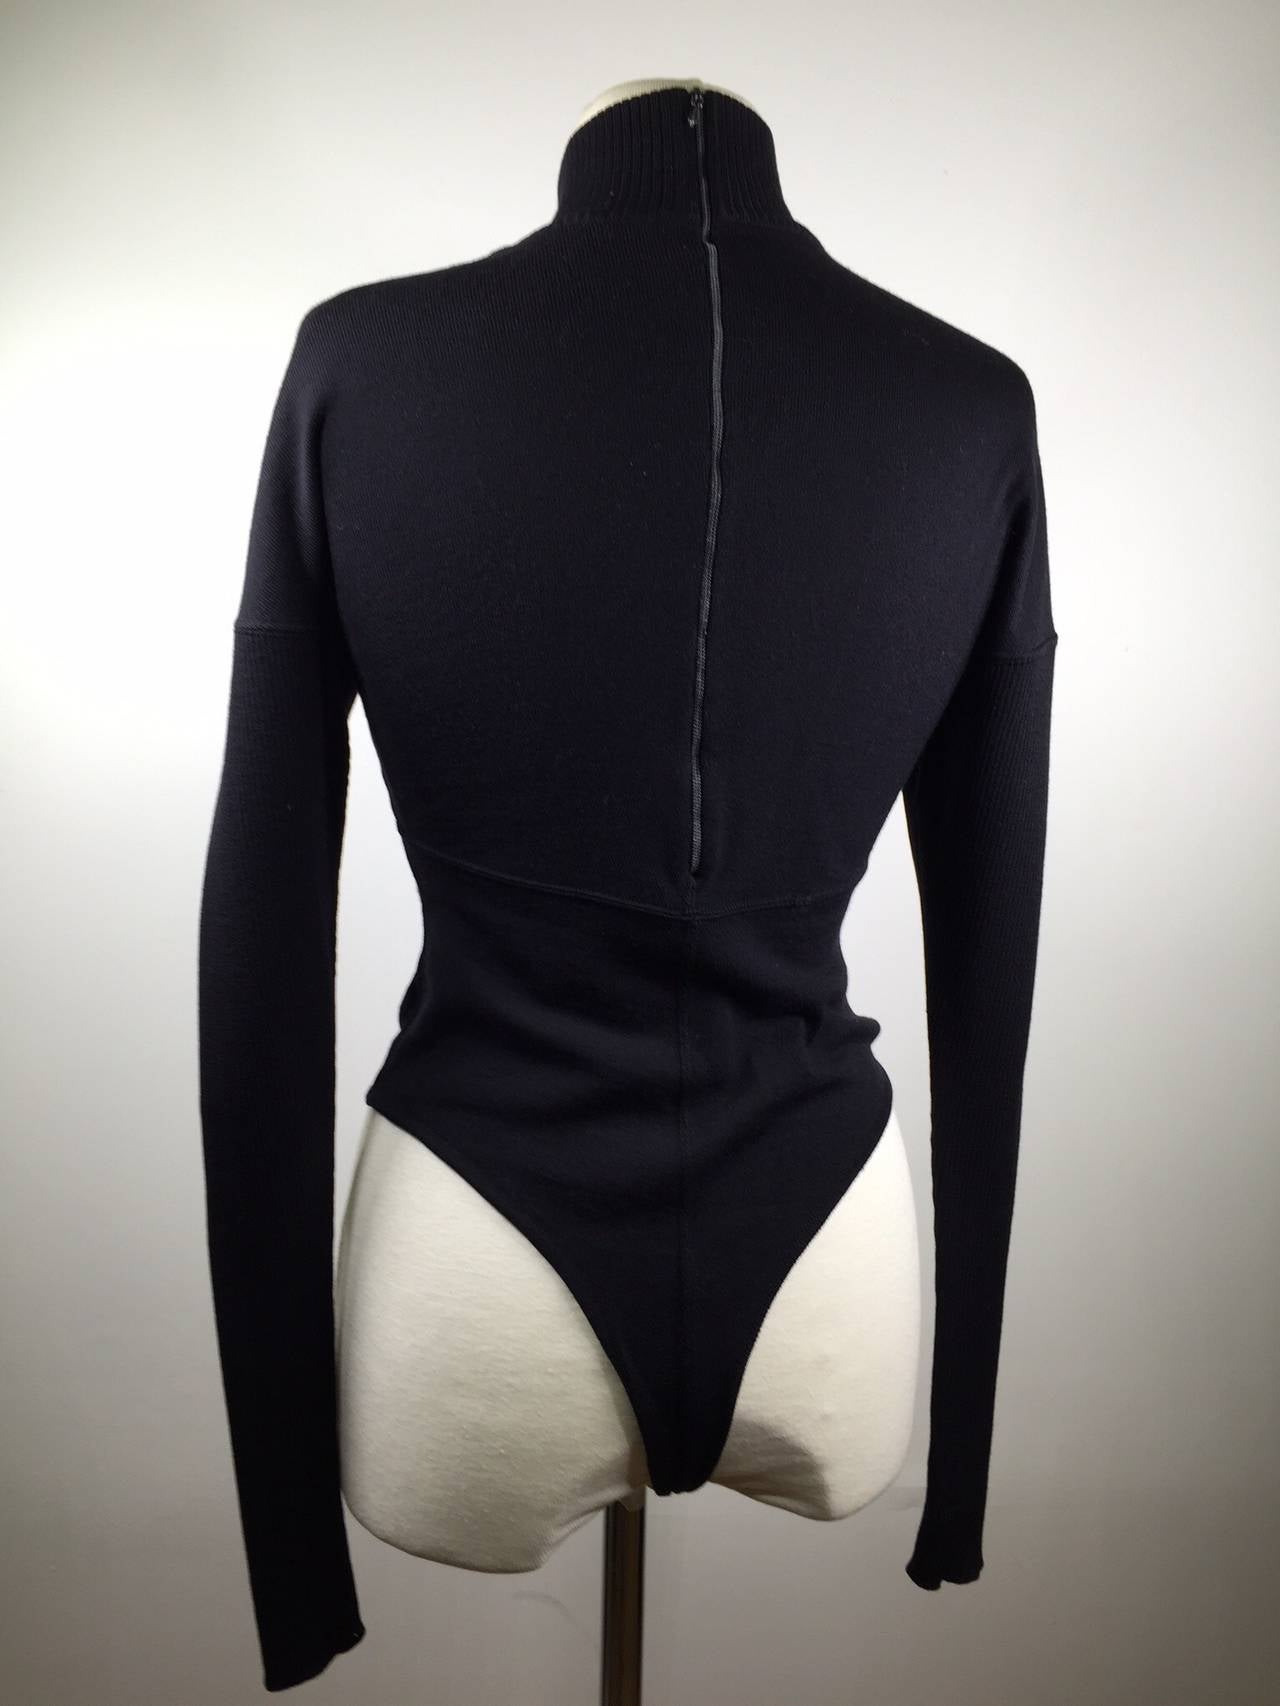 This is a rare Alaia wool black thong bodysuit. 
Measurements:
Bust 34